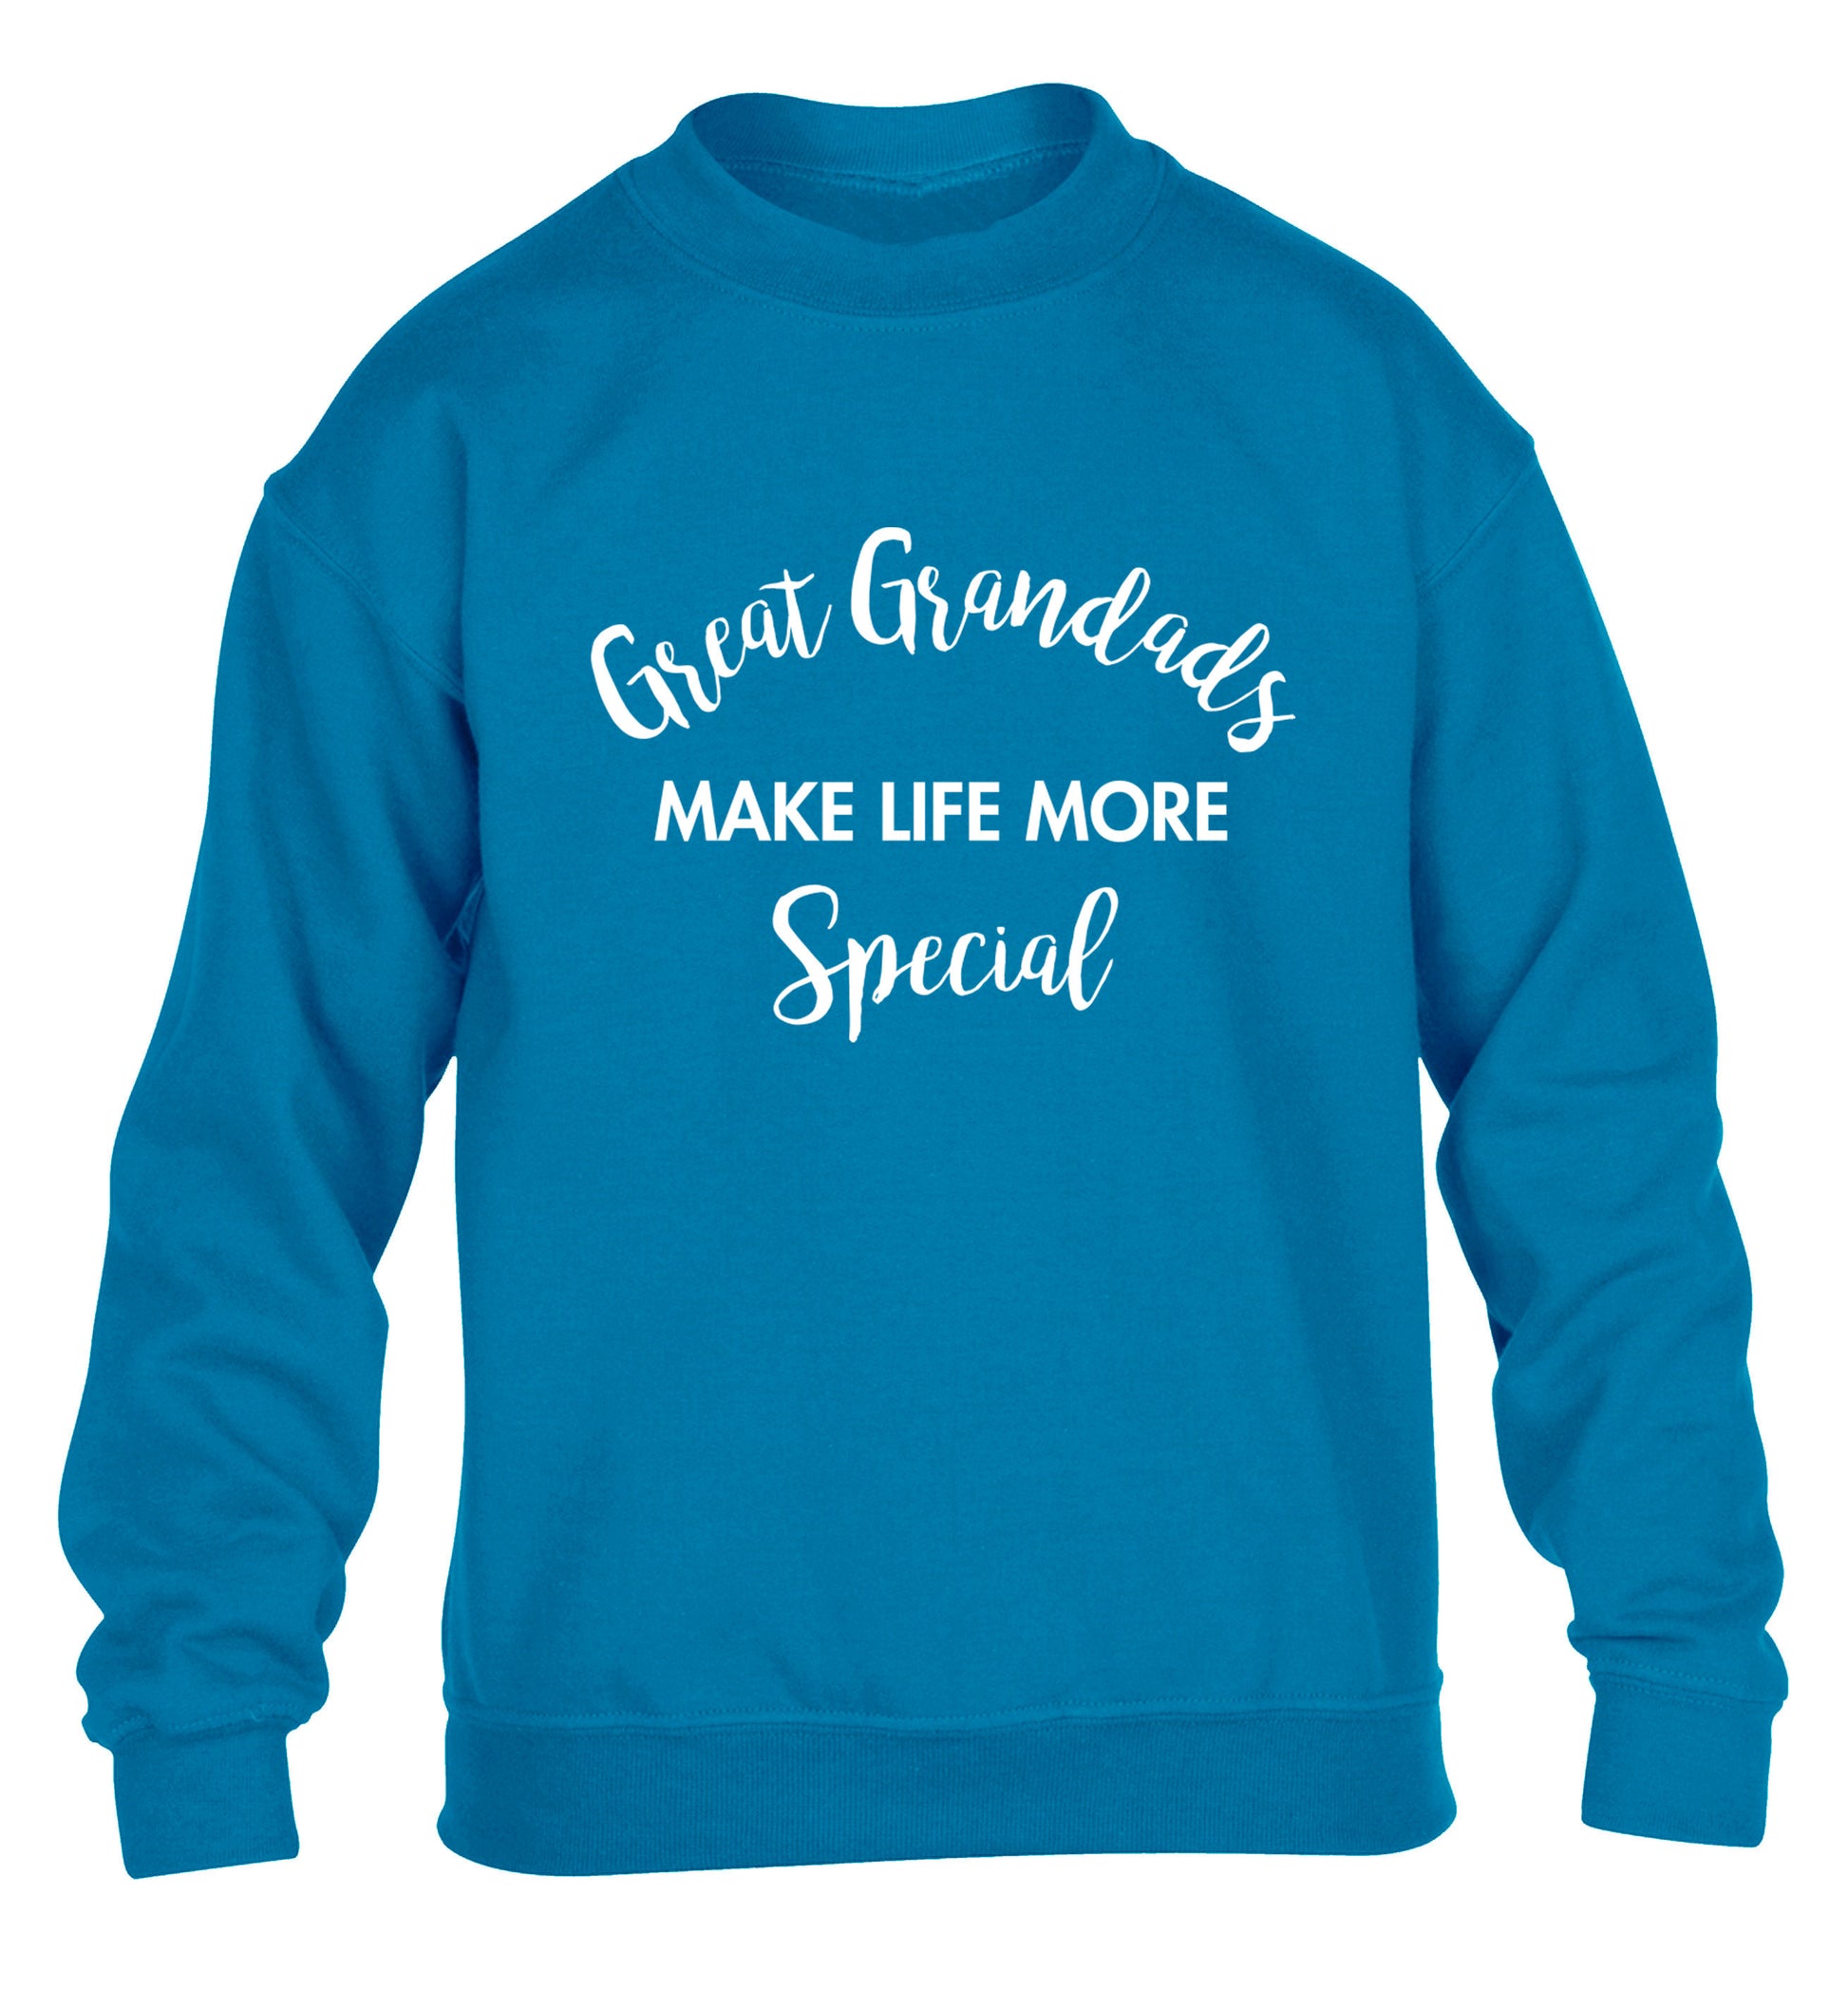 Great Grandads make life more special children's blue sweater 12-14 Years